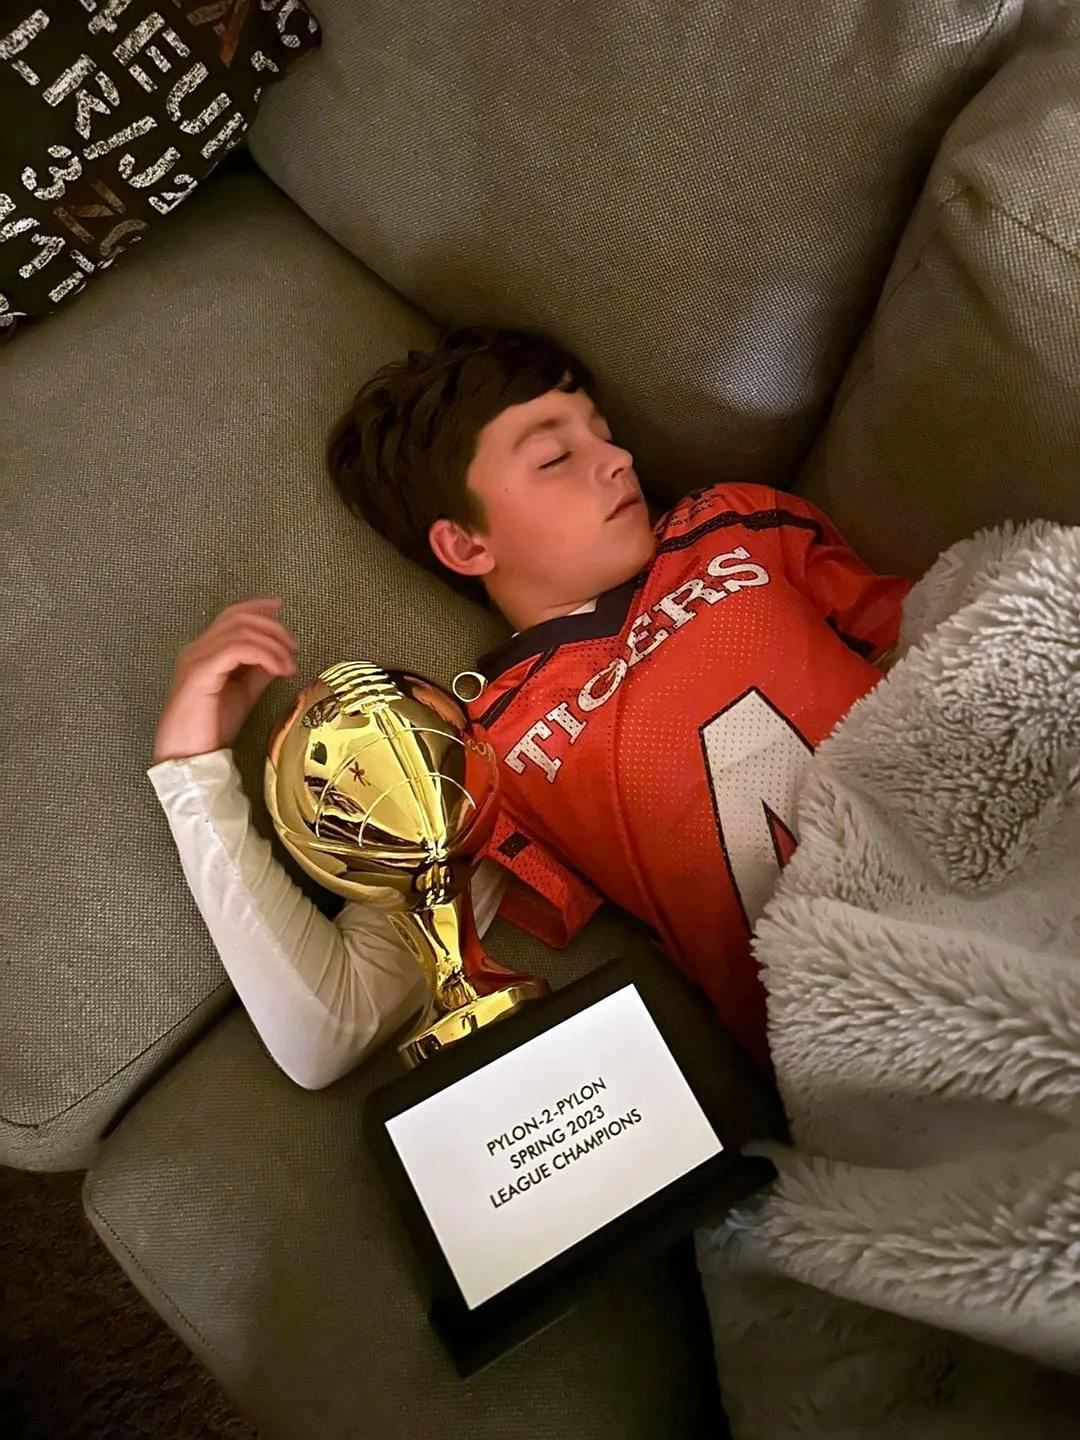 A flag football kid sleeping with his trophy